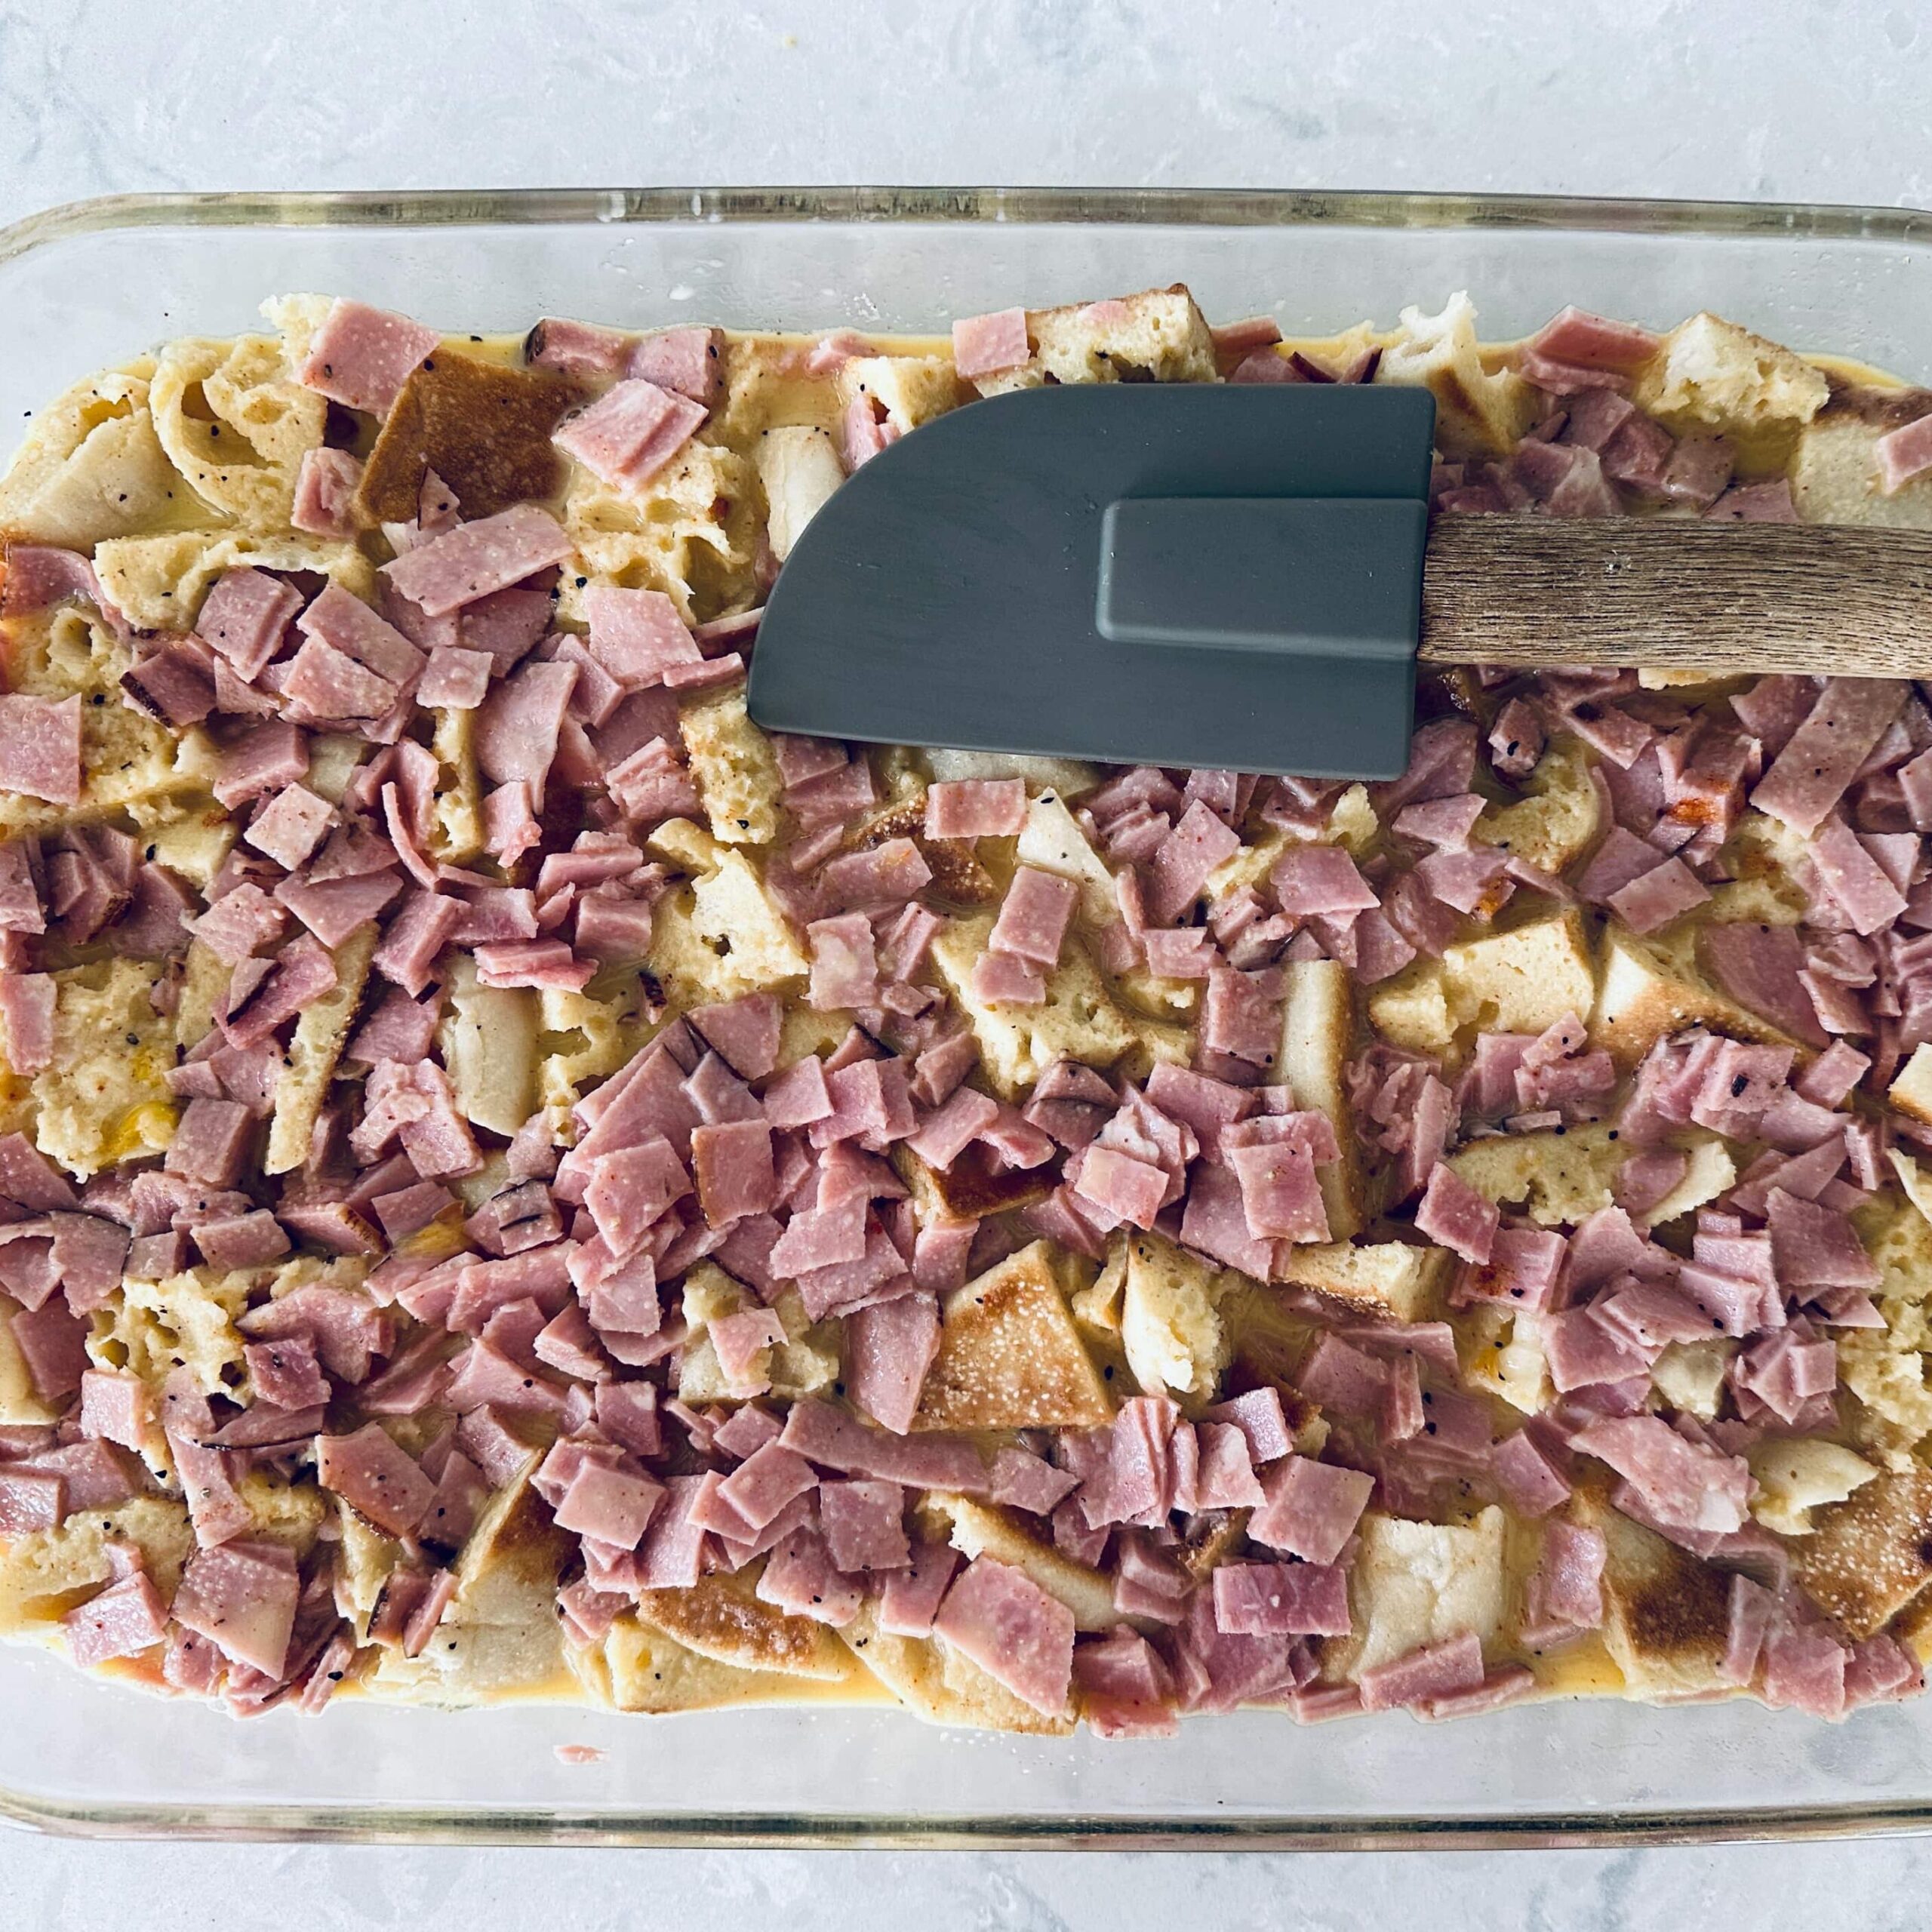 Eggs benedict casserole with custard mixture soaking in it and a spatula on top.